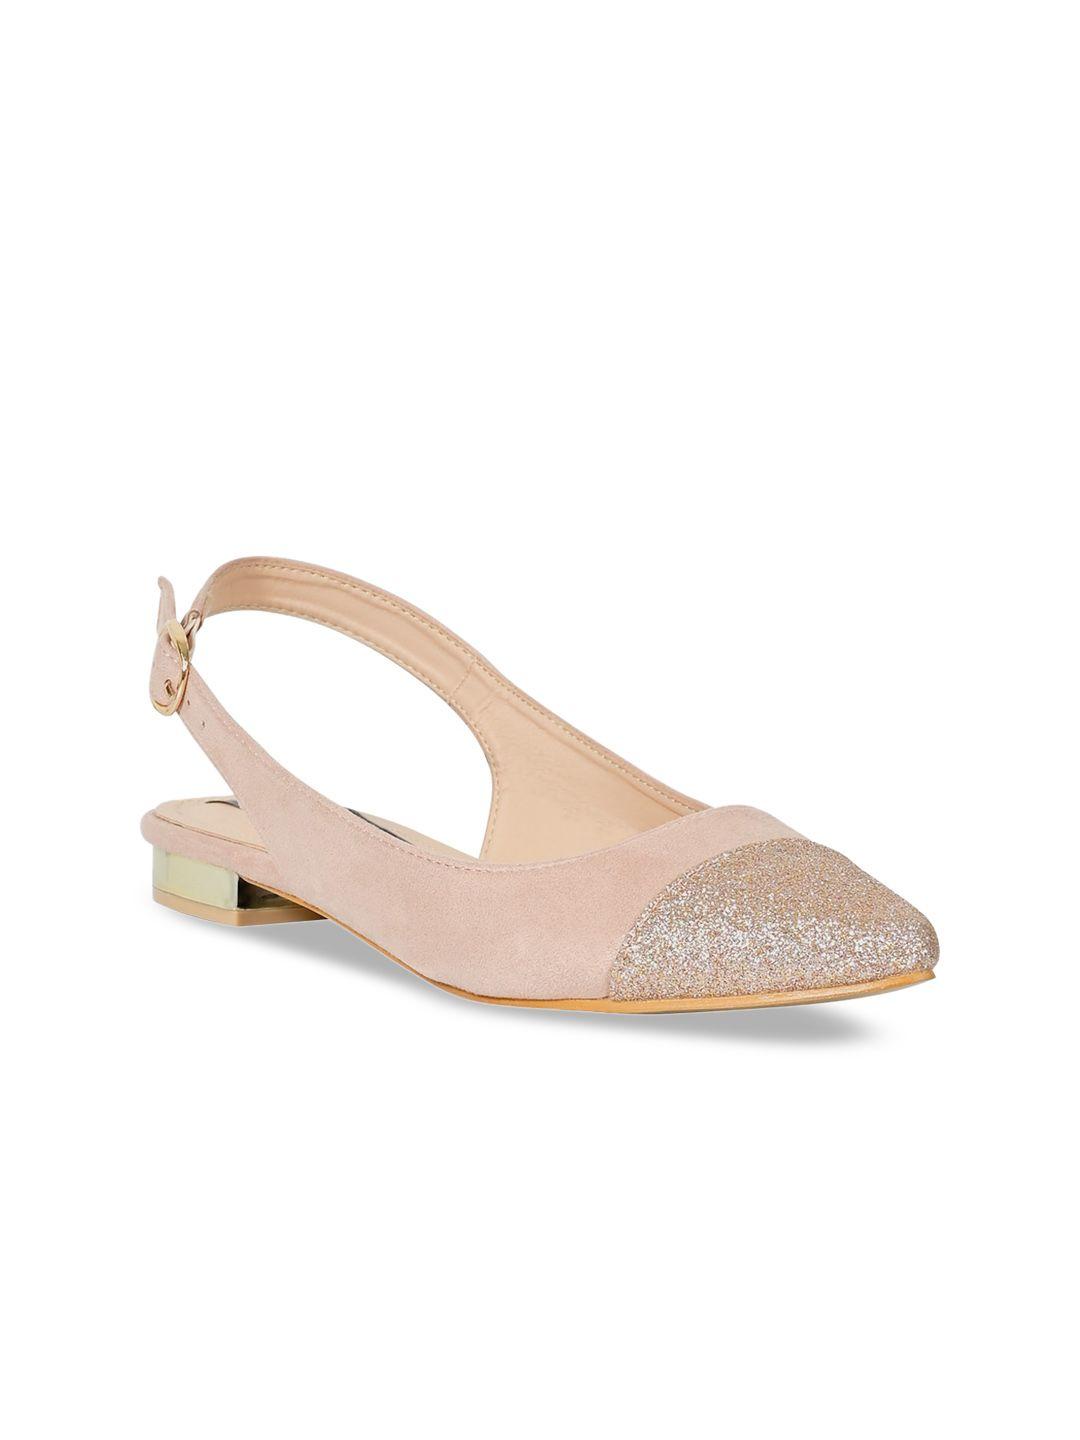 jove women nude-coloured embellished mules flats